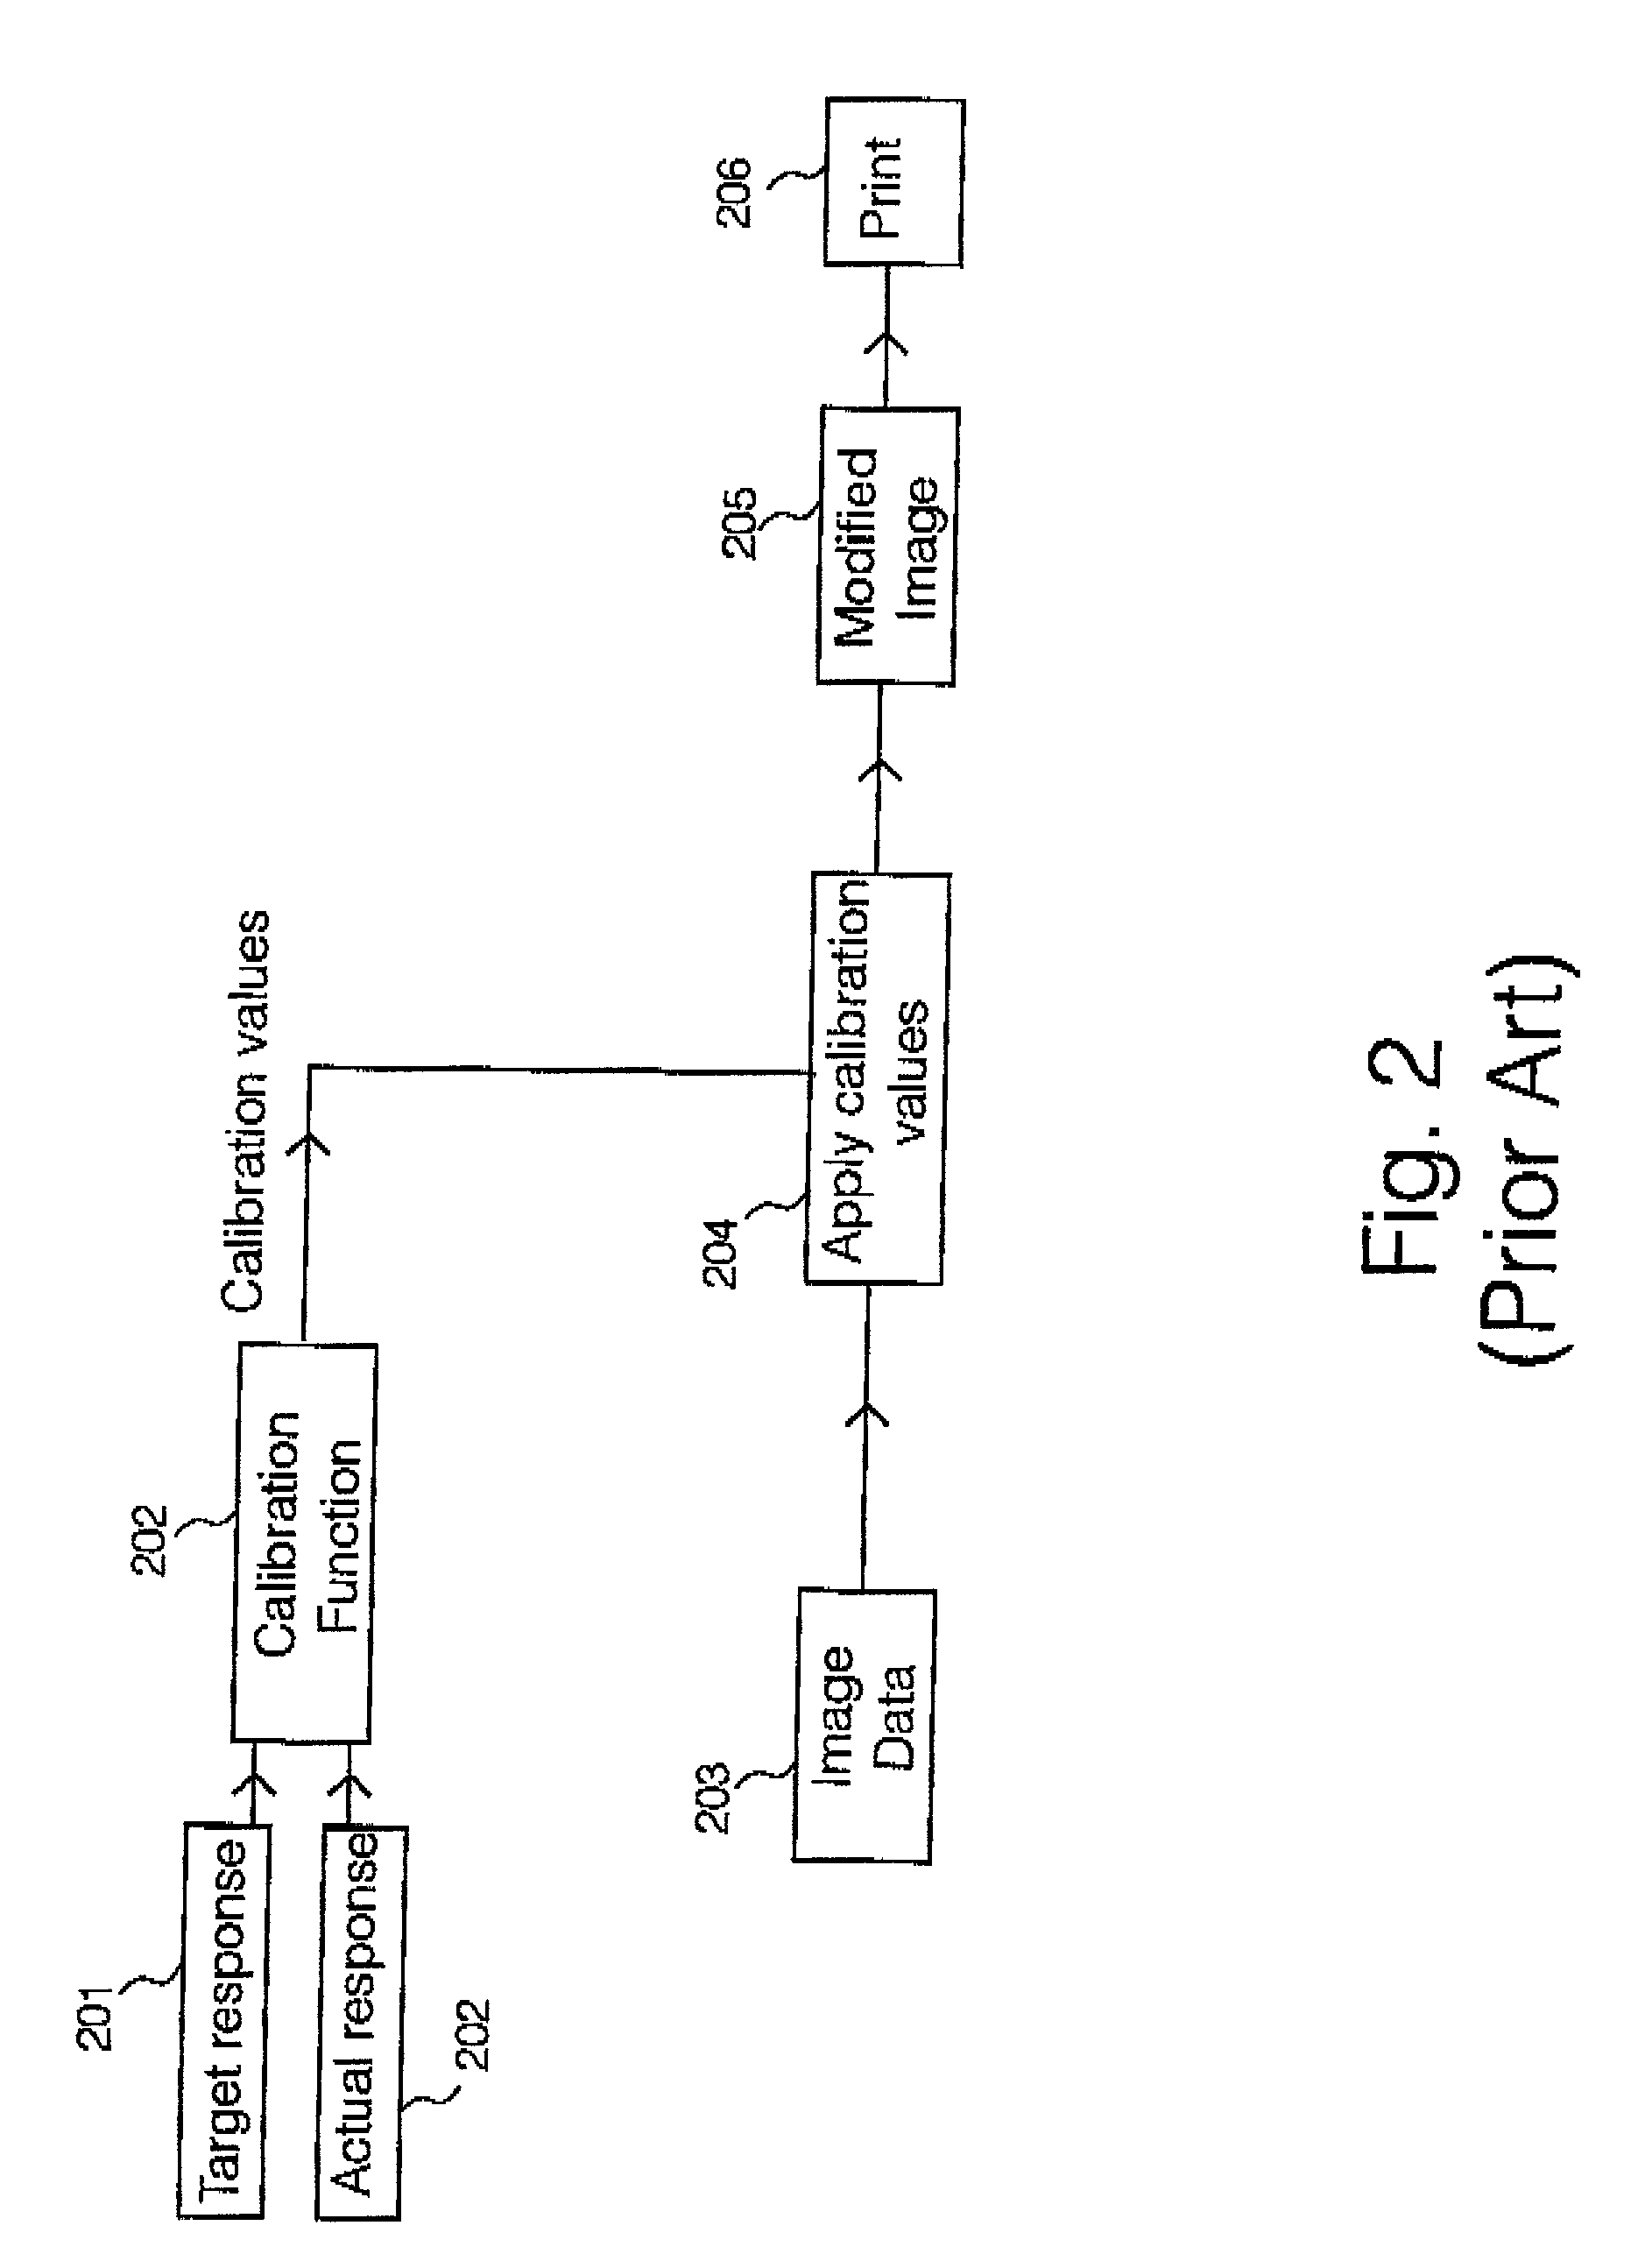 Automatic triggering of a closed loop color calibration in printer device